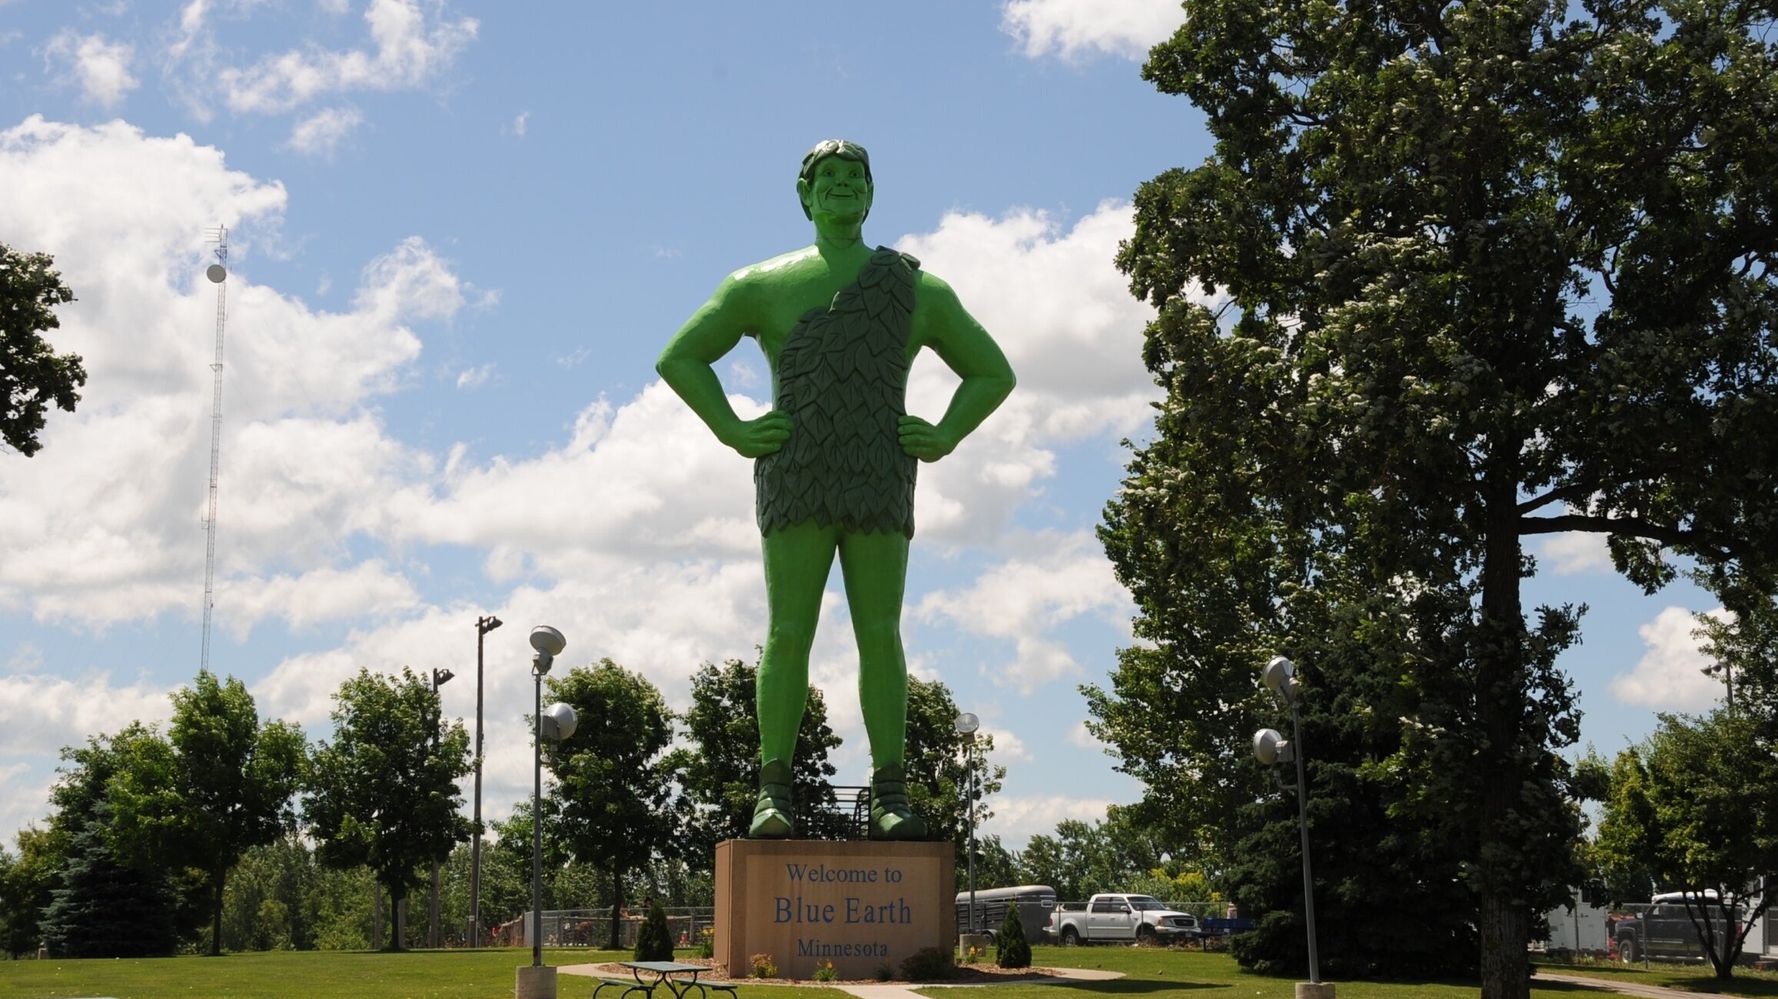 The Jolly Green Giant's DecadesLong Evolution Raises Some Questions